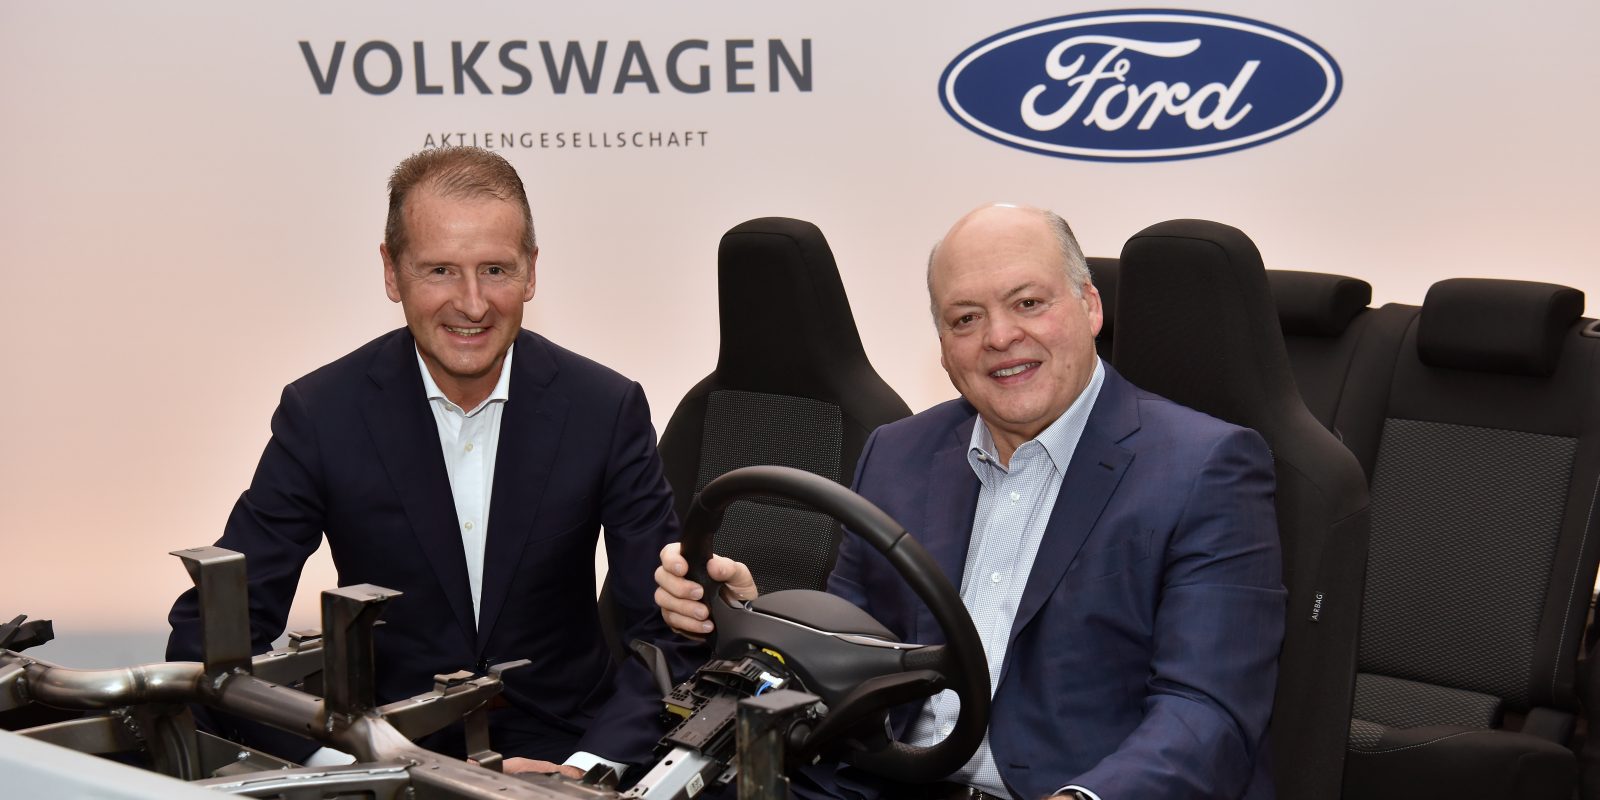 VW Ford electric car self-driving